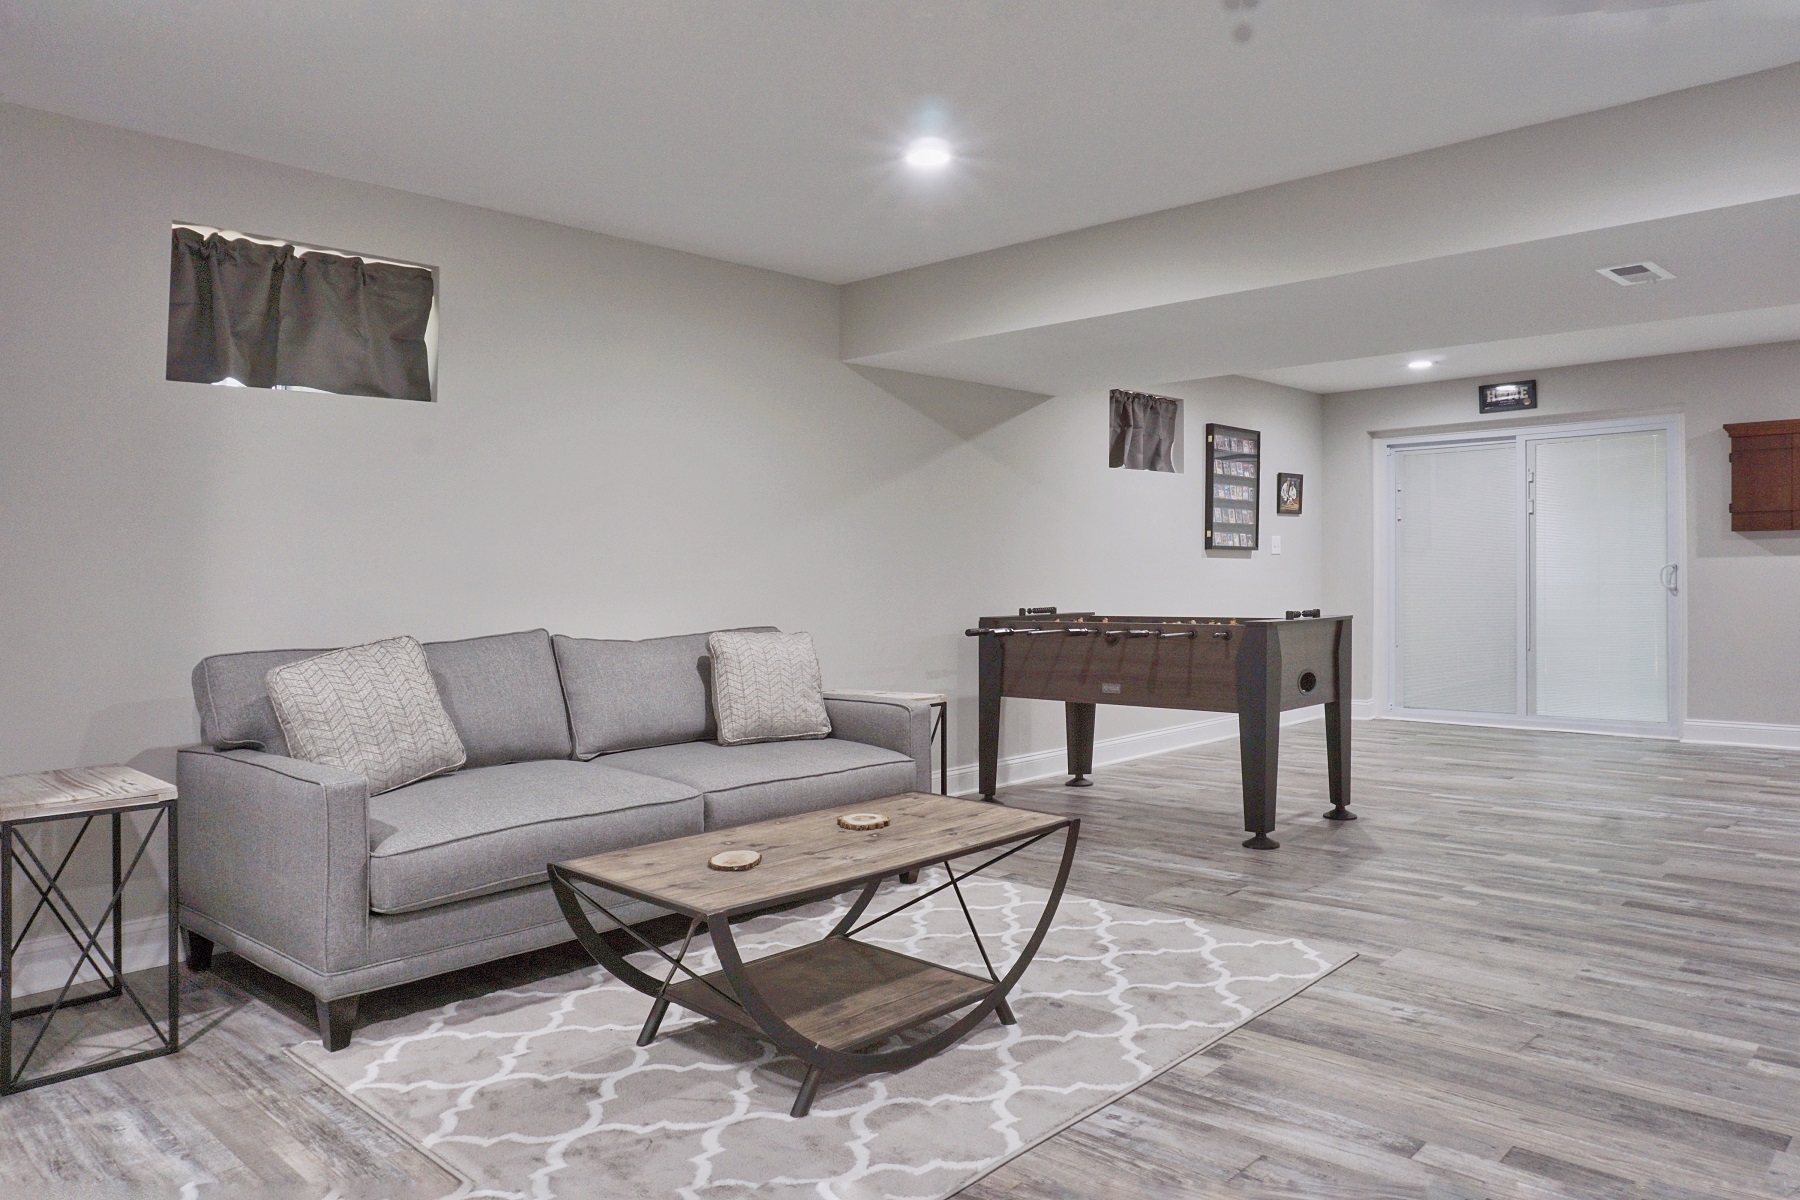 Top 5 Tips in Achieving Your Budget Basement Remodeling 2020